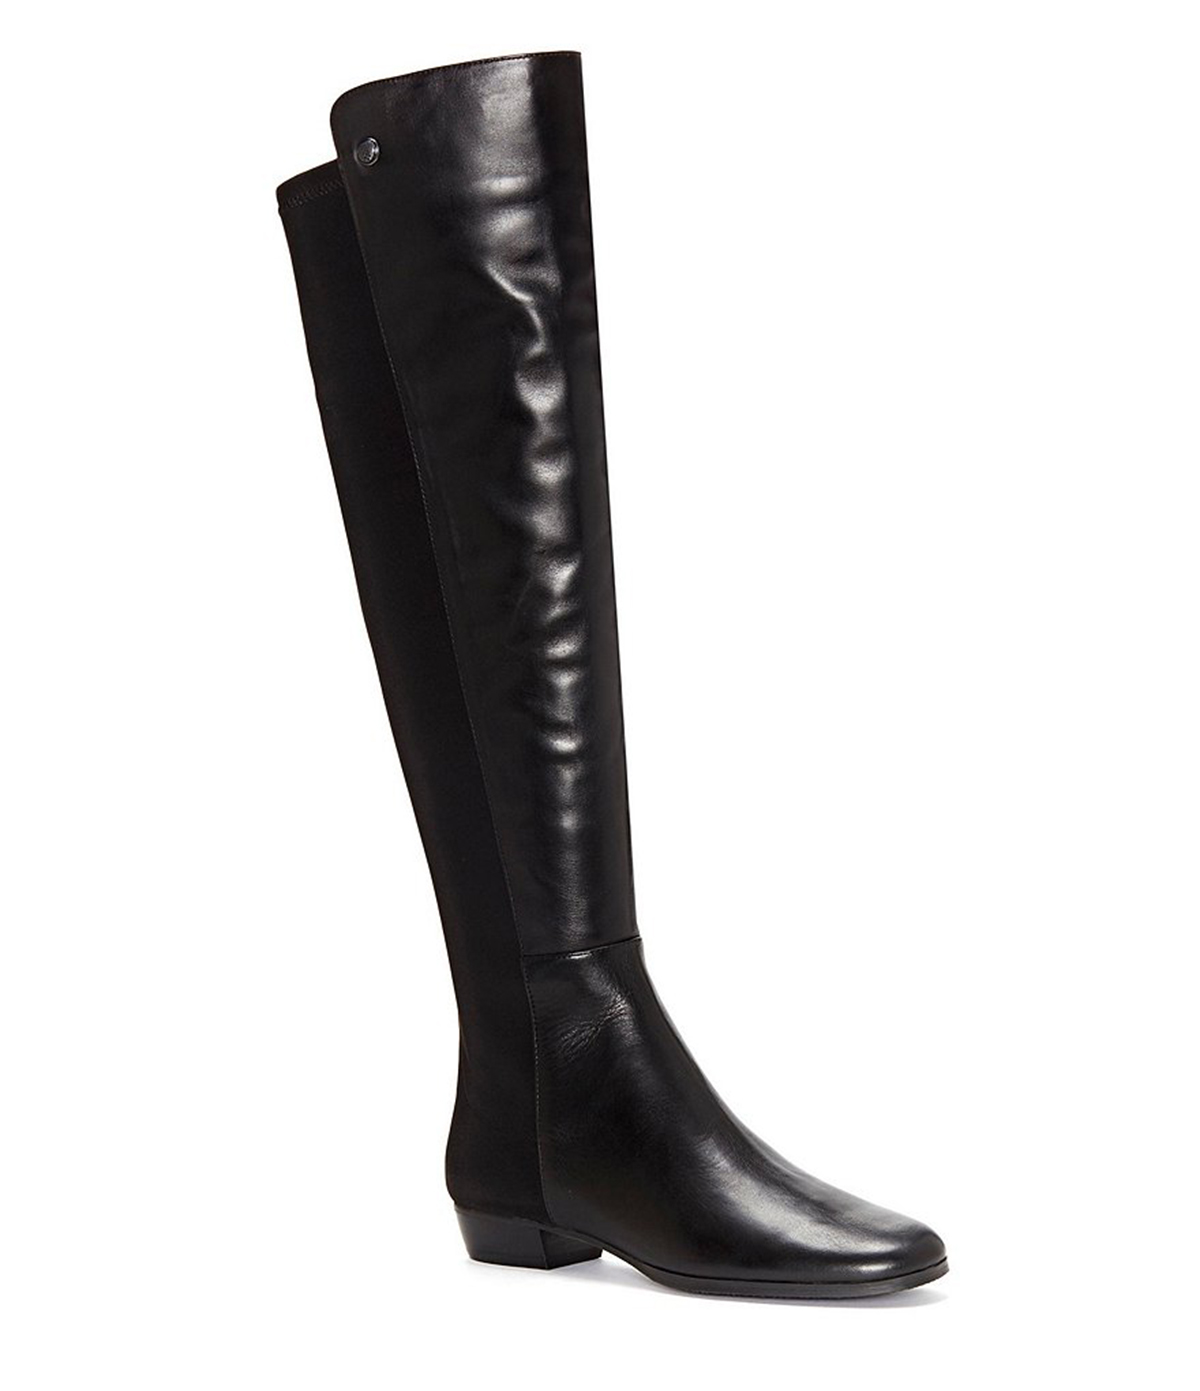 Top Reviewed Essential Over-the-Knee Boots Are on Sale at Zappos | Us ...